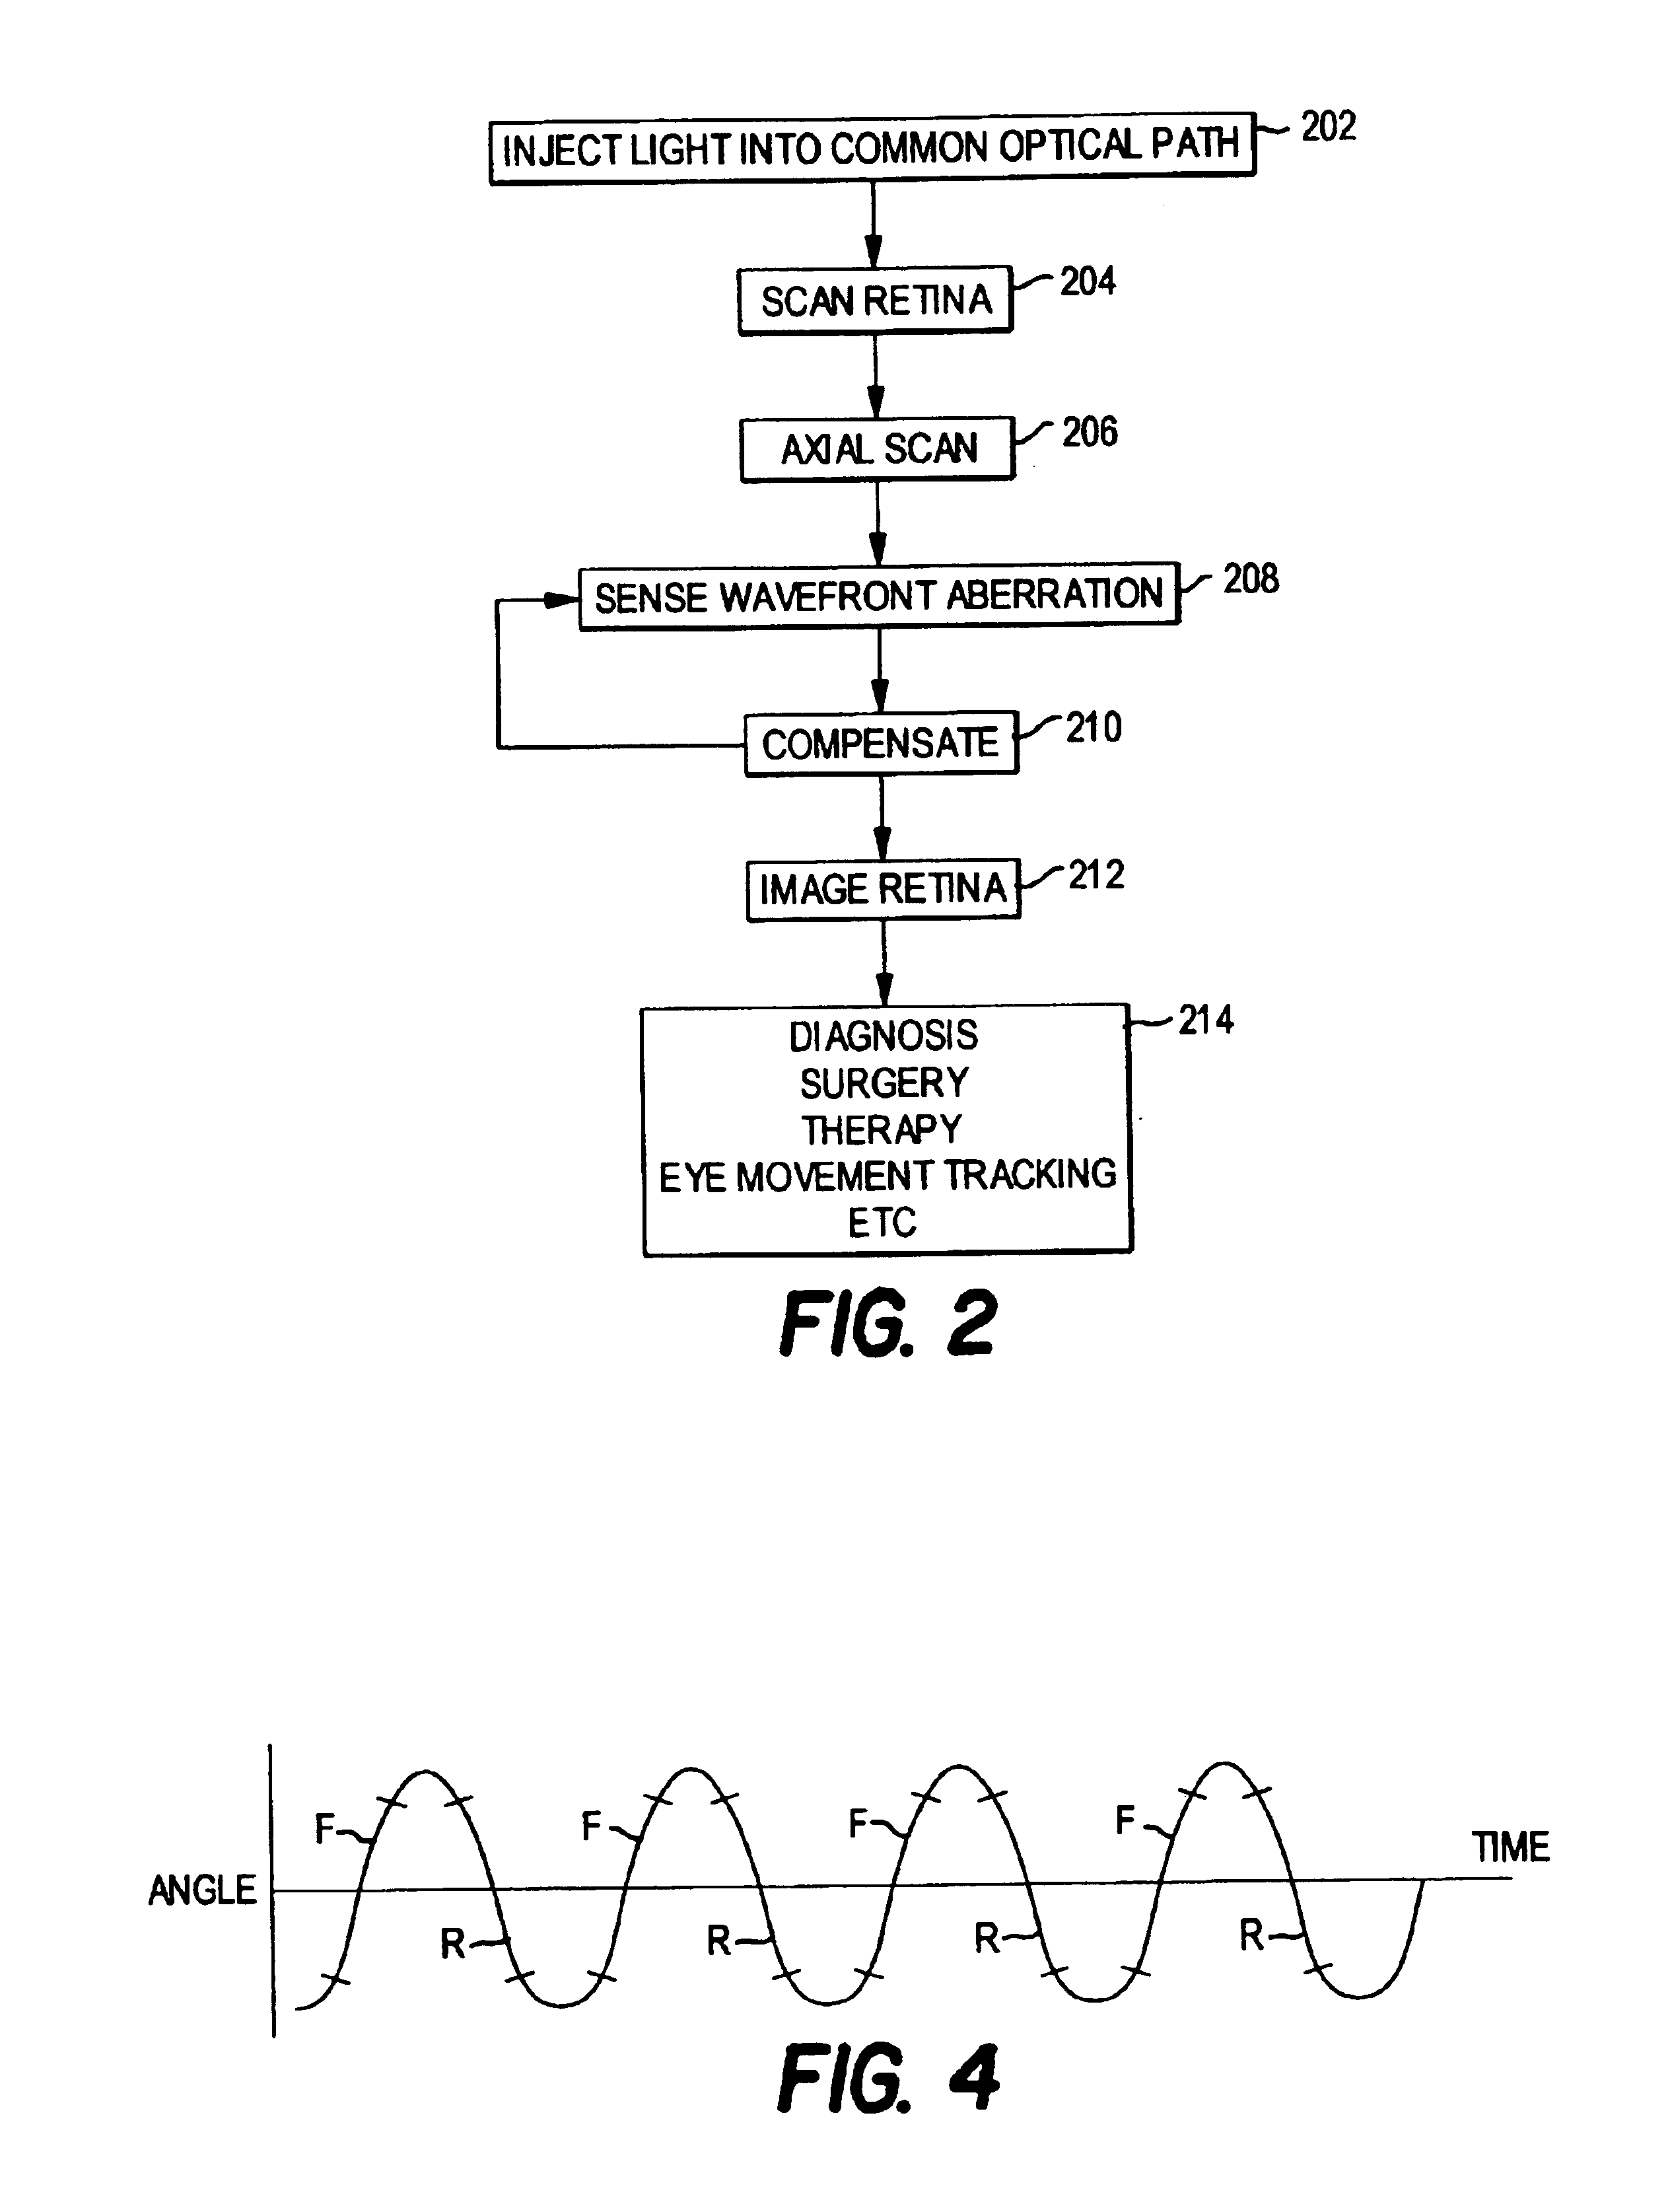 Method and apparatus for using adaptive optics in a scanning laser ophthalmoscope